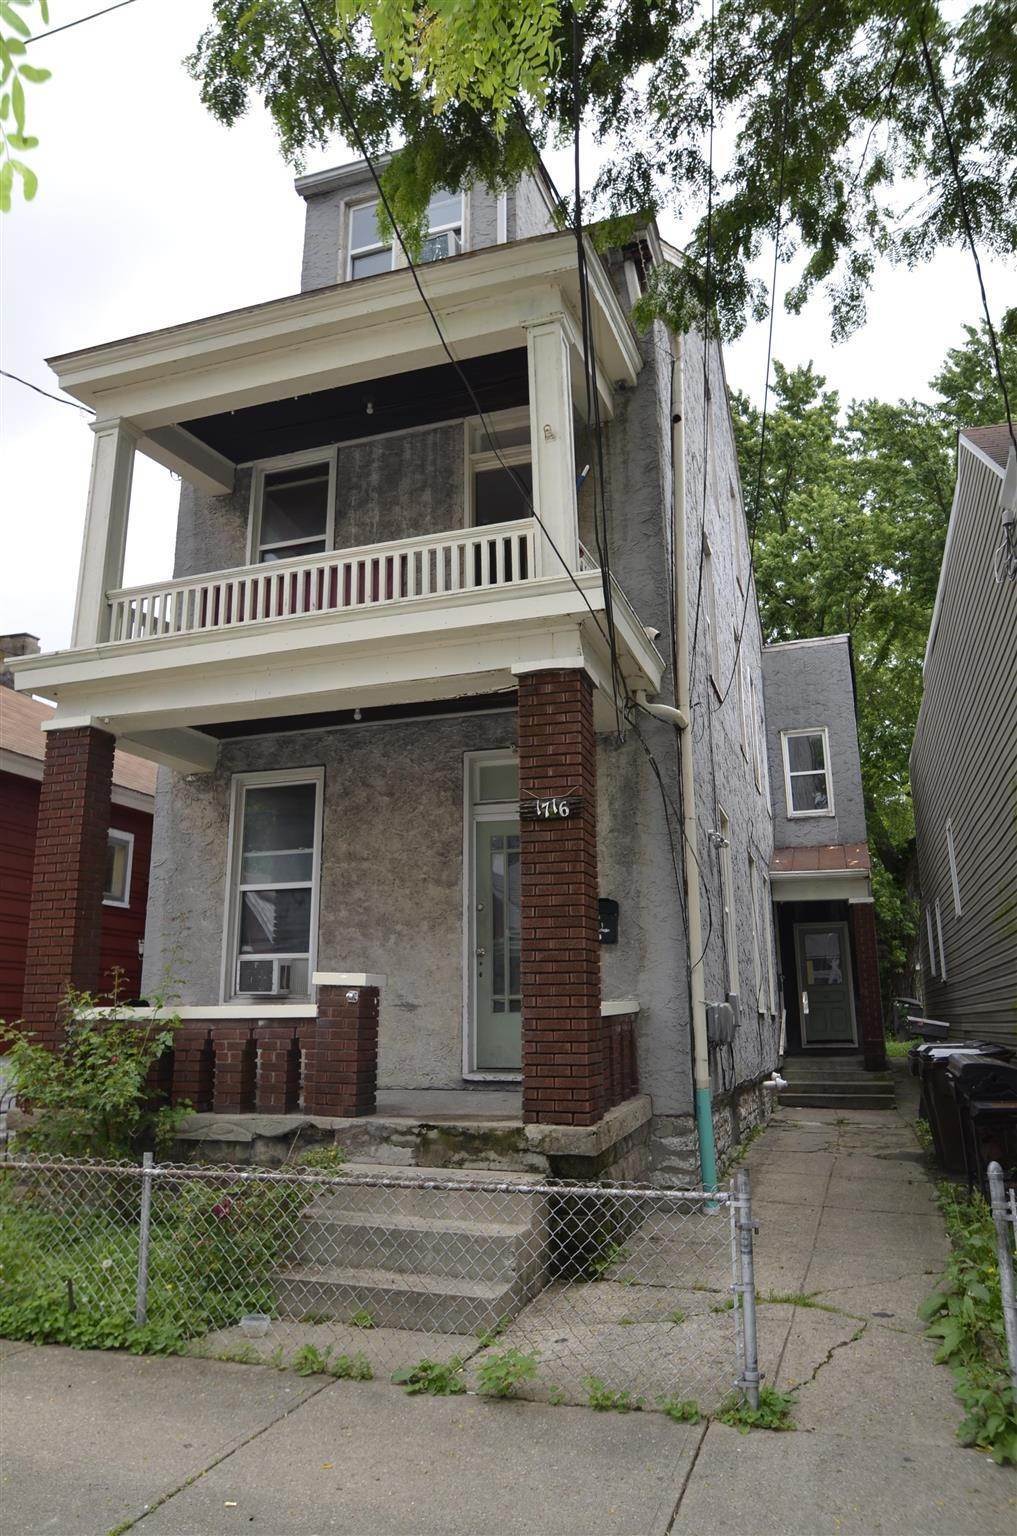 3. Multi Family for Sale at 1716 Banklick 1716 Banklick Covington, Kentucky 41011 United States